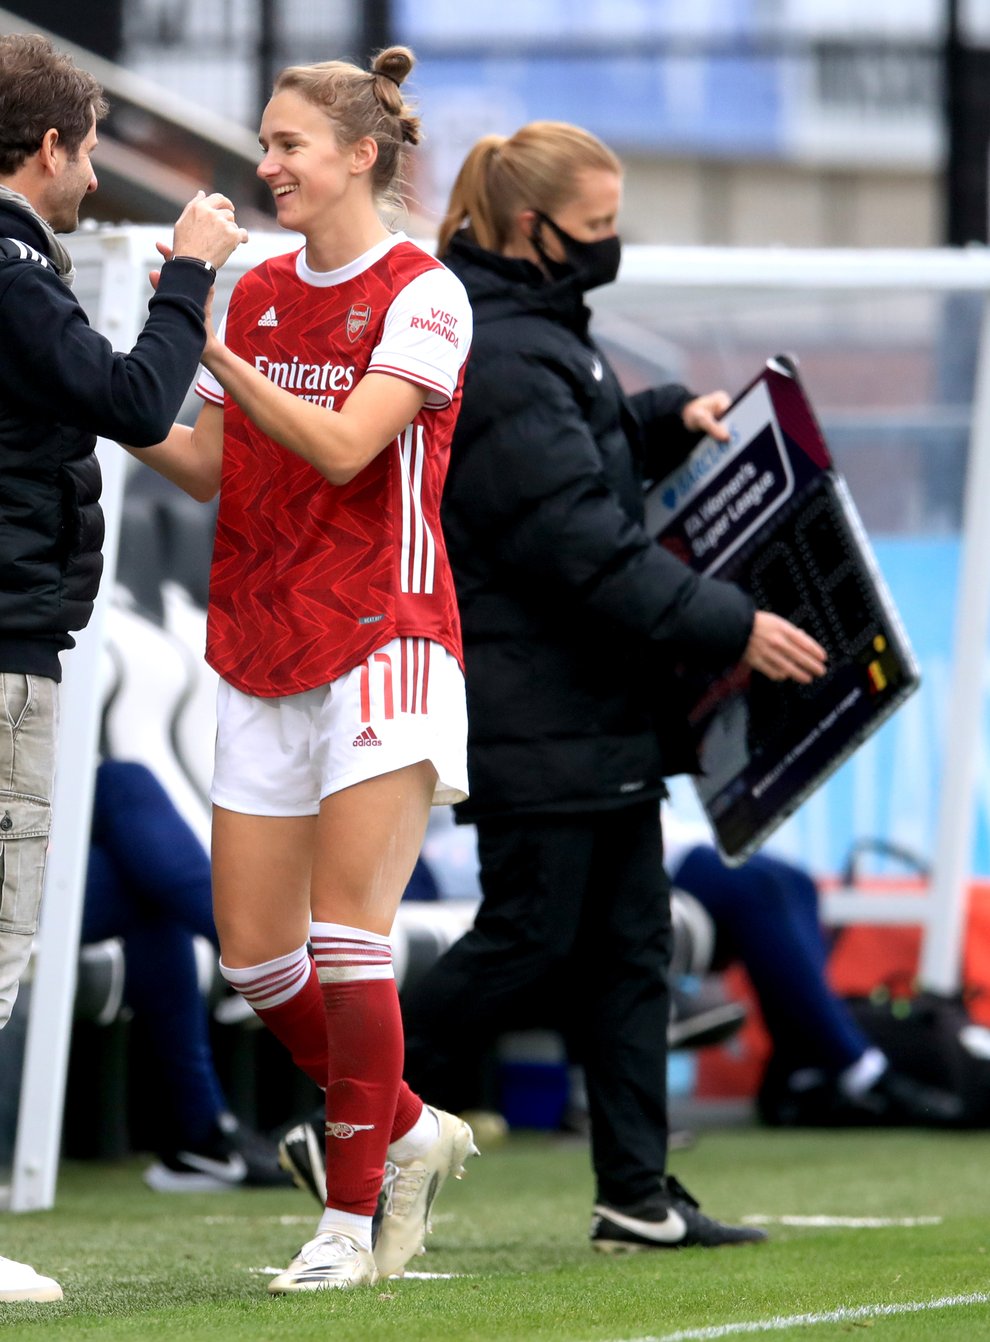 Miedema is in line for a new contract at Arsenal